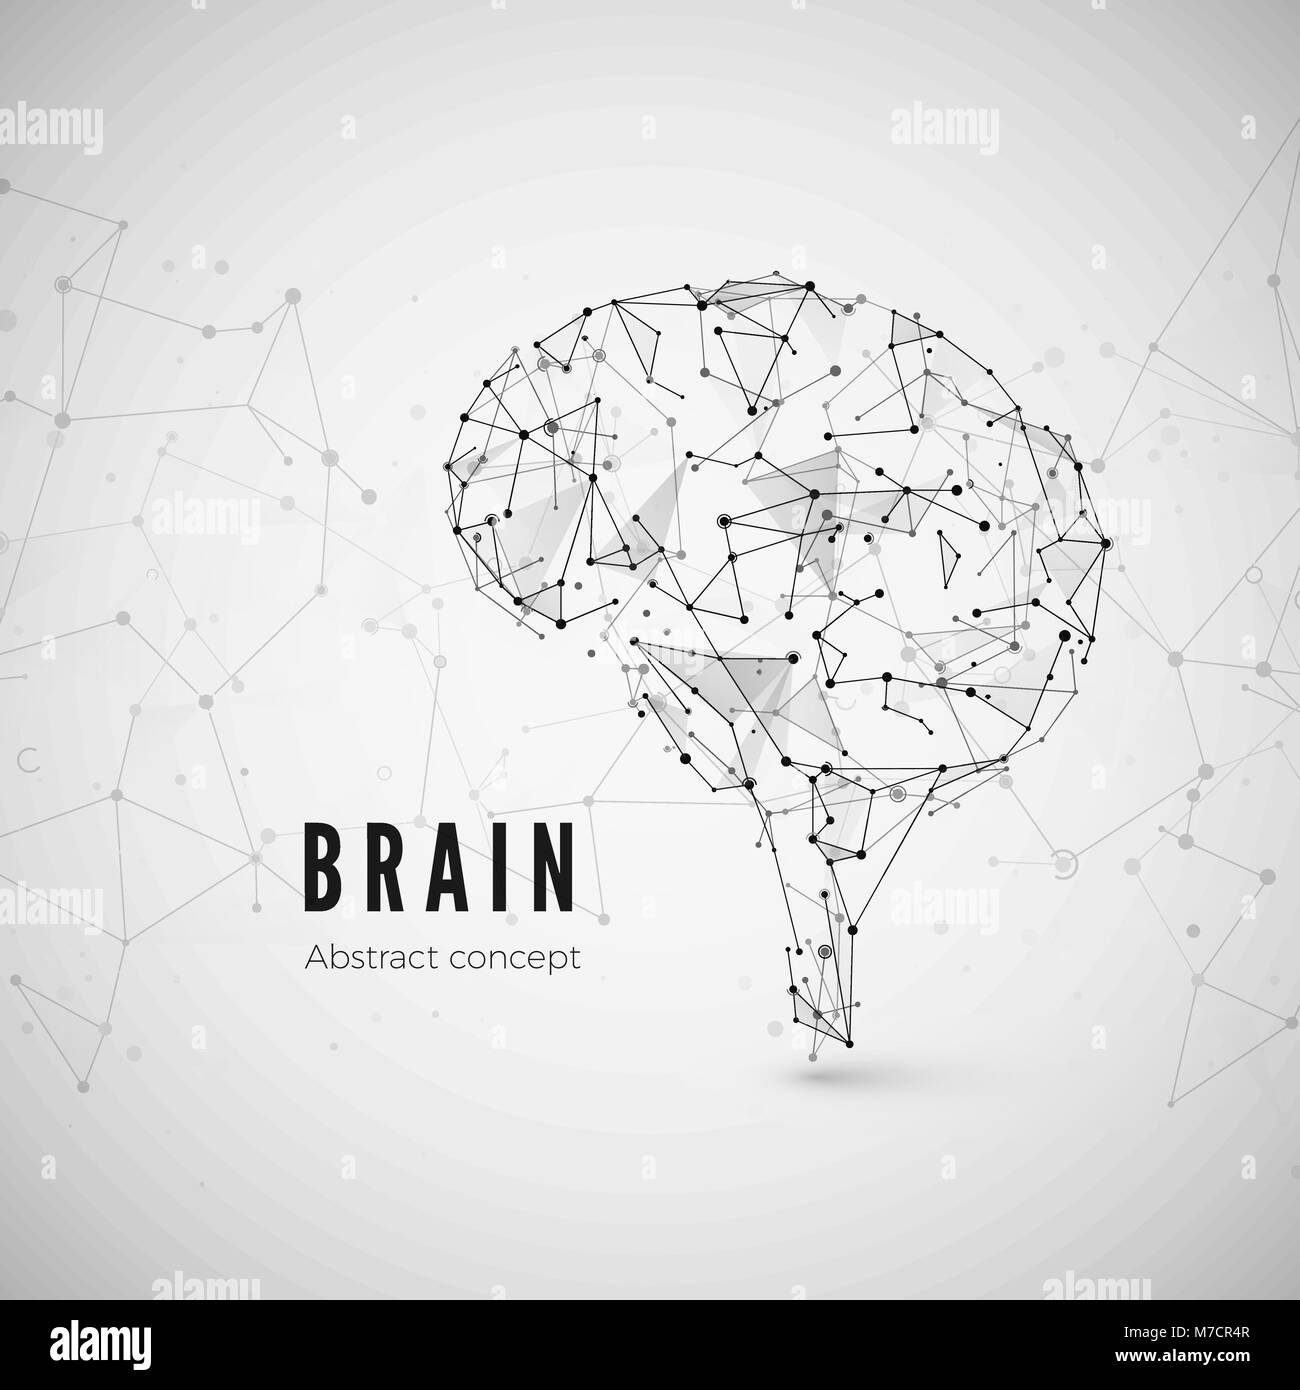 Graphic concept of the brain. Technology and science background with brain icon. Brain is composed of points, lines and triangles. Vector illustration Stock Vector